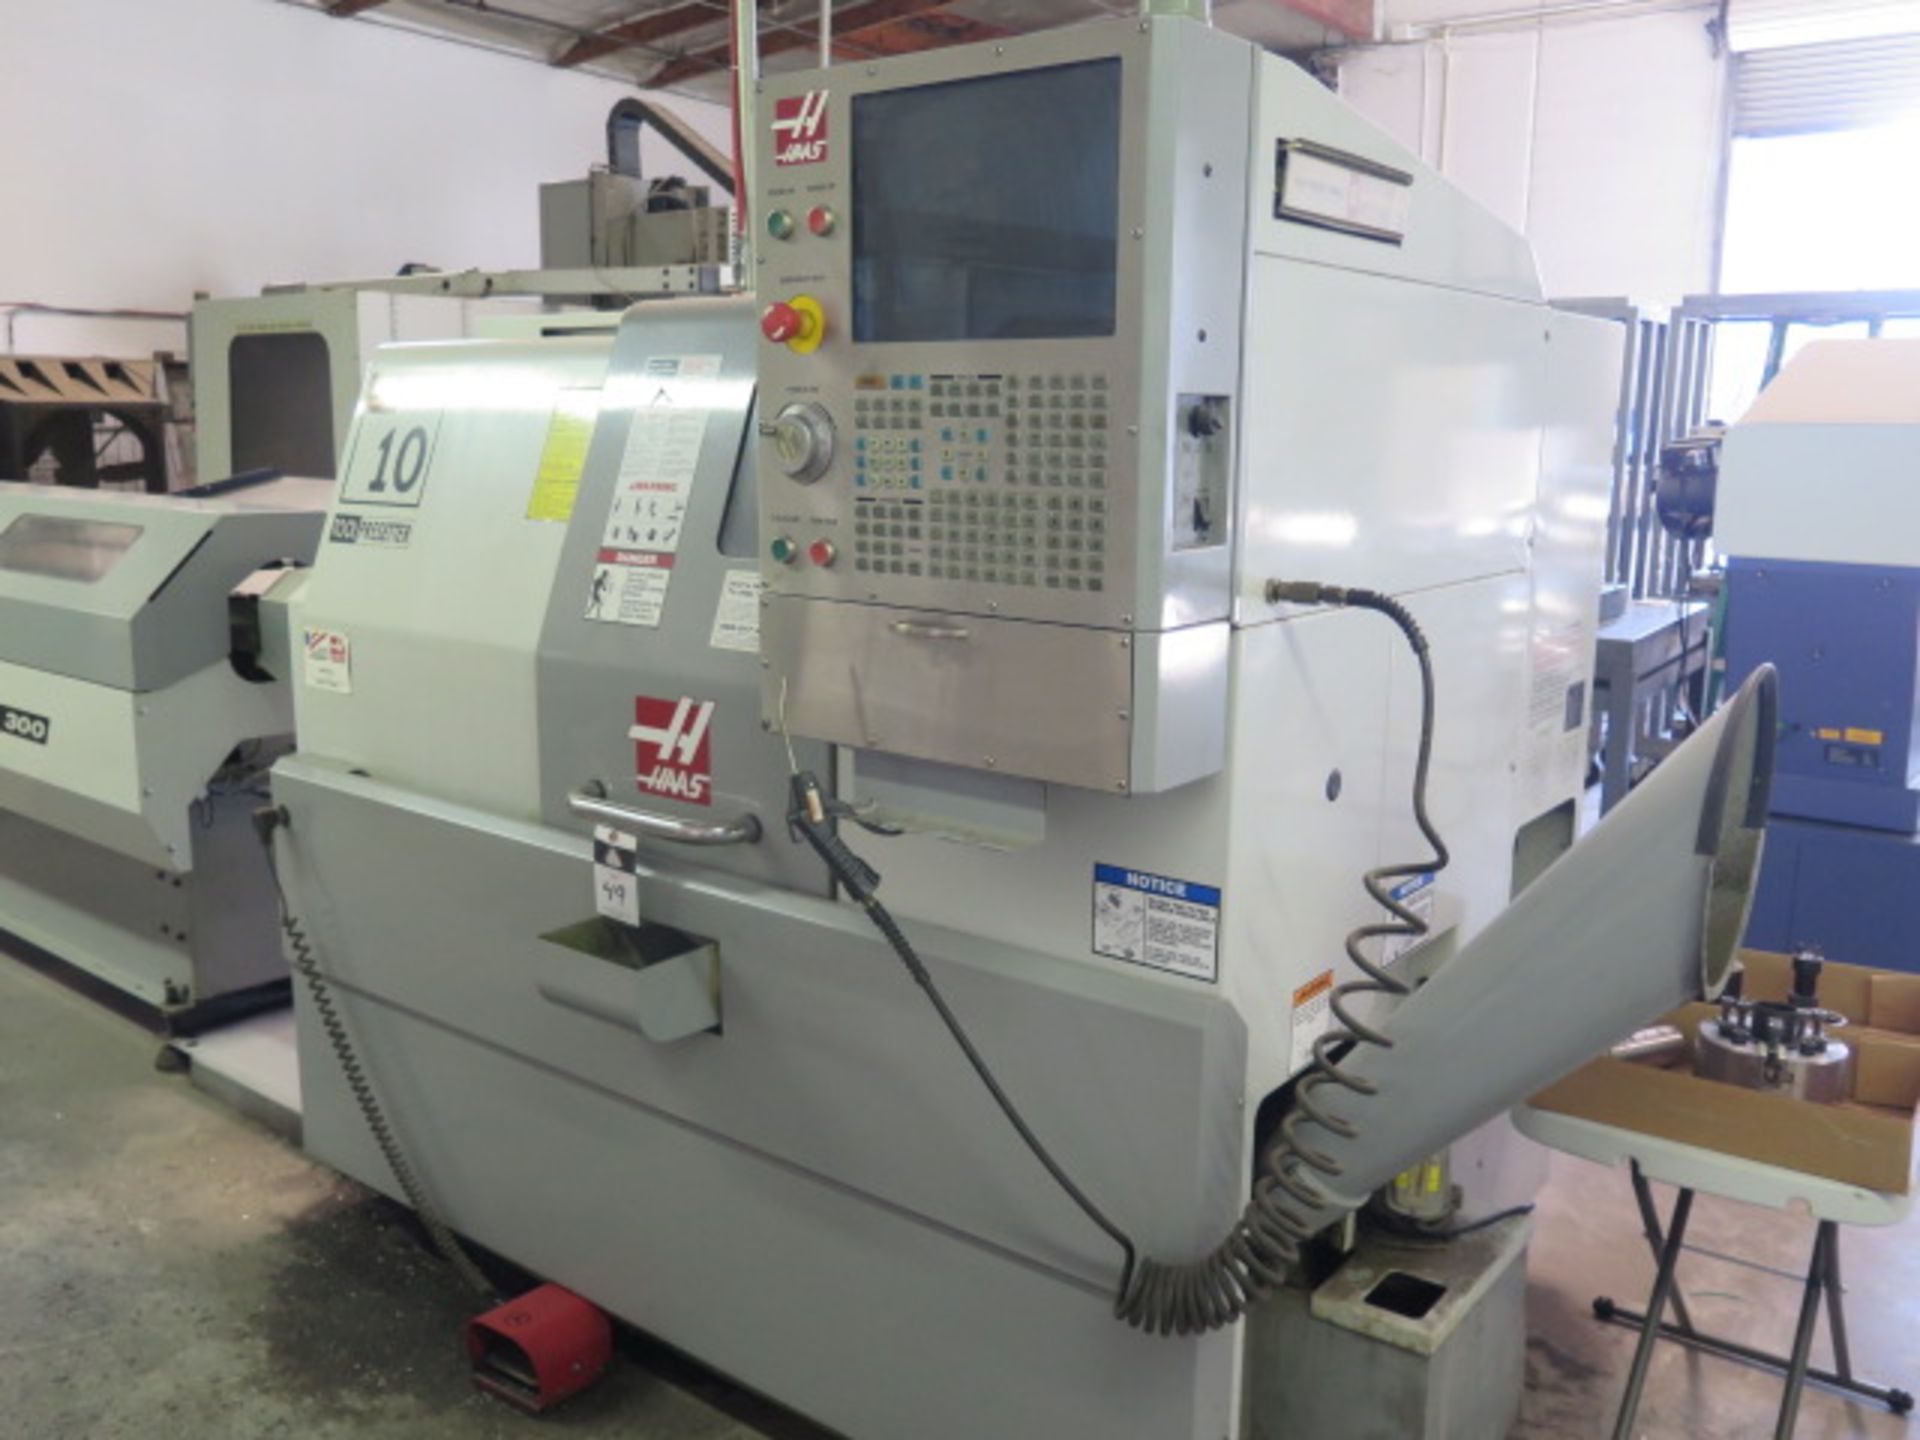 2006 Haas SL-10 CNC Turning Center s/n 3075023, Tool Presetter, 12-Station Turret, SOLD AS IS - Image 2 of 13